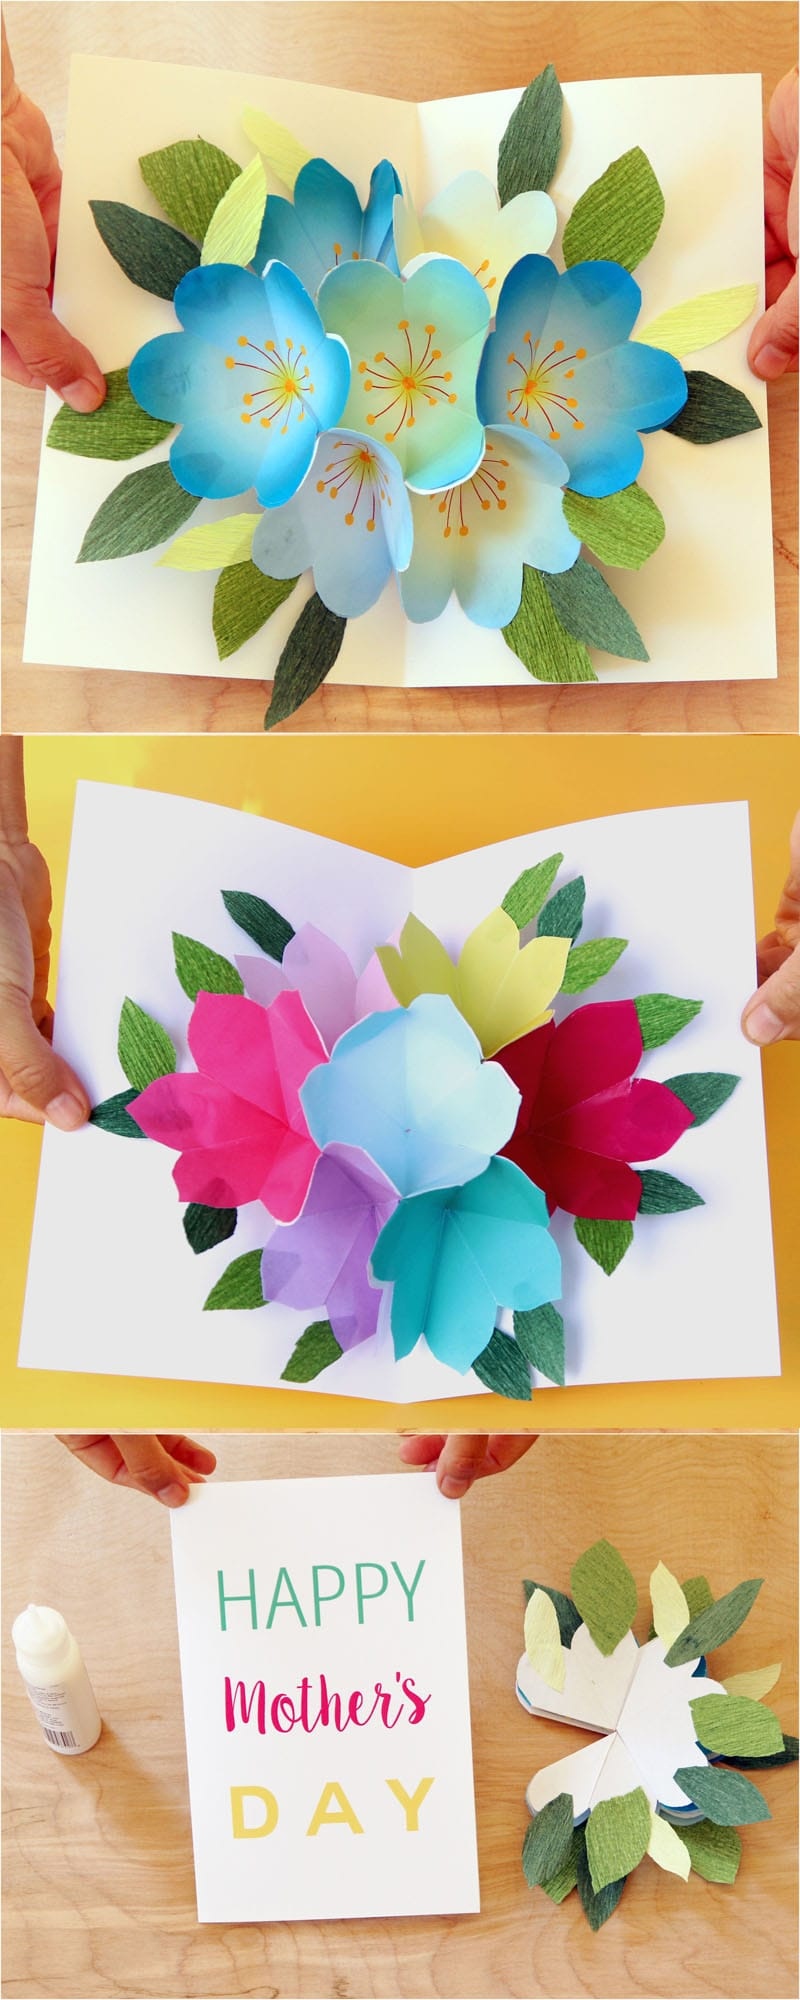 Pop Up Flowers Diy Printable Mother's Day Card - A Piece Of Rainbow - Free Printable Pop Up Birthday Card Templates